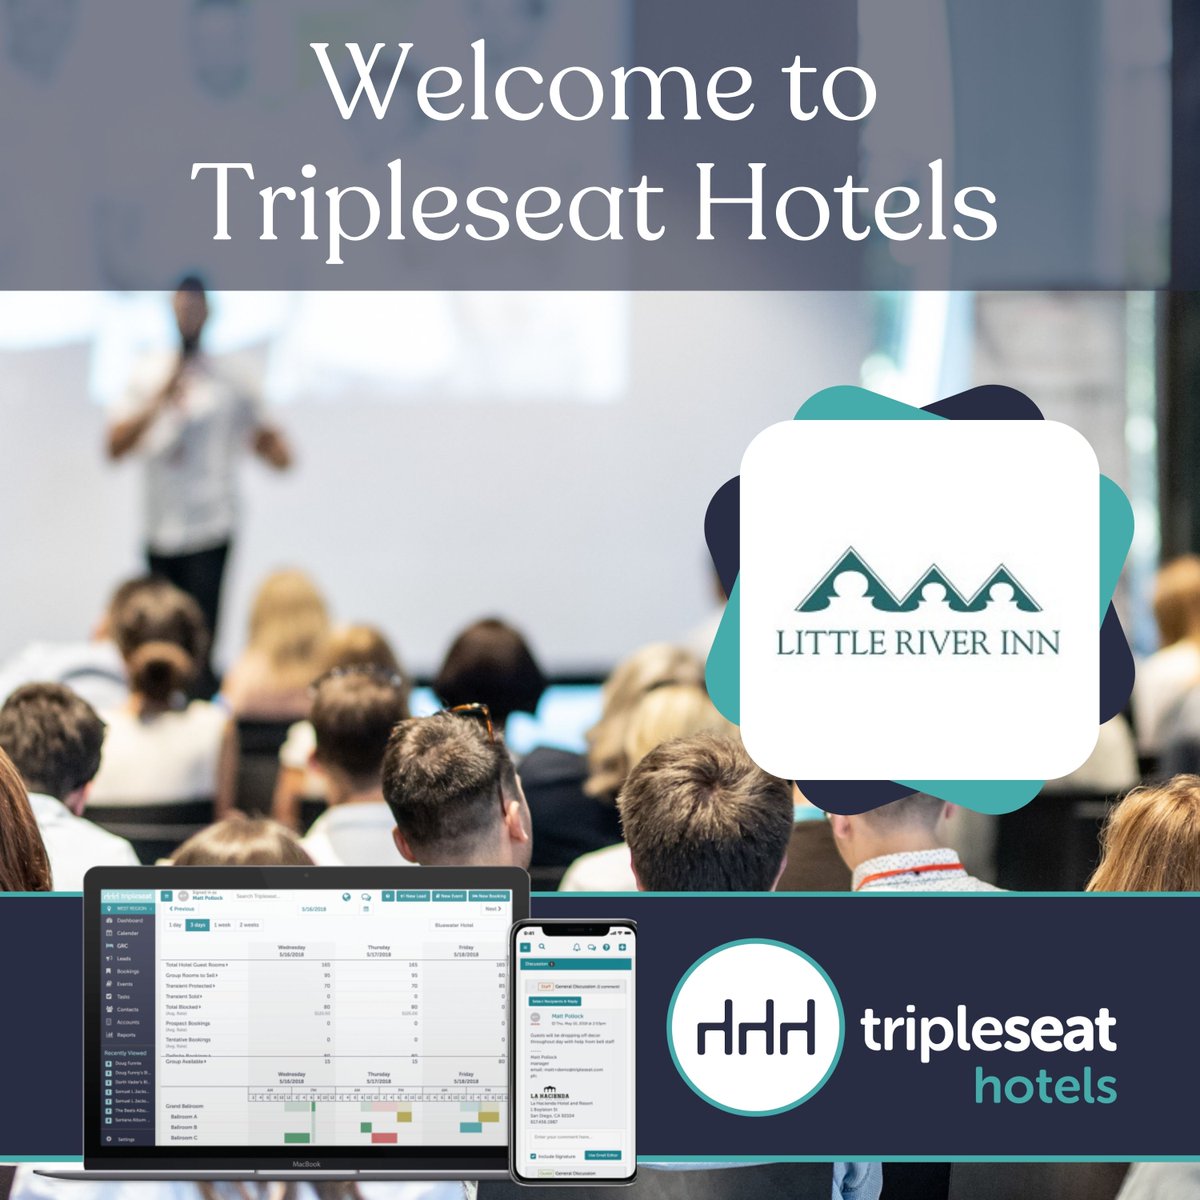 Welcome to Tripleseat Hotels, Little River Inn! Looking to streamline how you manage #groupsales and #events at your #hotel? Tripleseat Hotels could be what you are missing. Learn more at the link below. bit.ly/49hXcWP #hotelier #hotelsales #groupsales